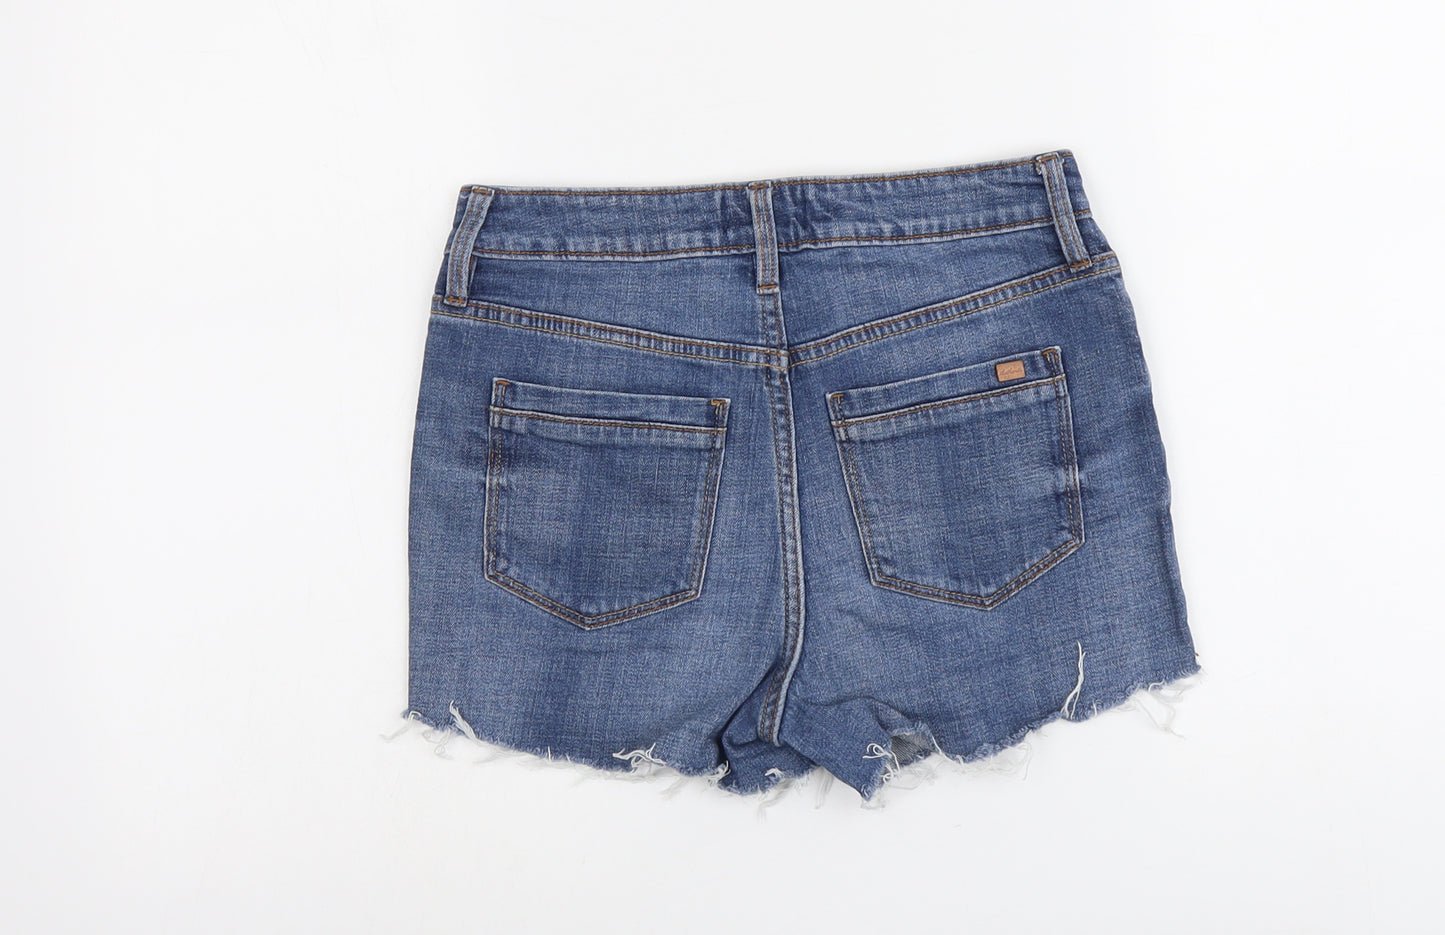 F&F Womens Blue Cotton Cut-Off Shorts Size 6 L3 in Regular Button